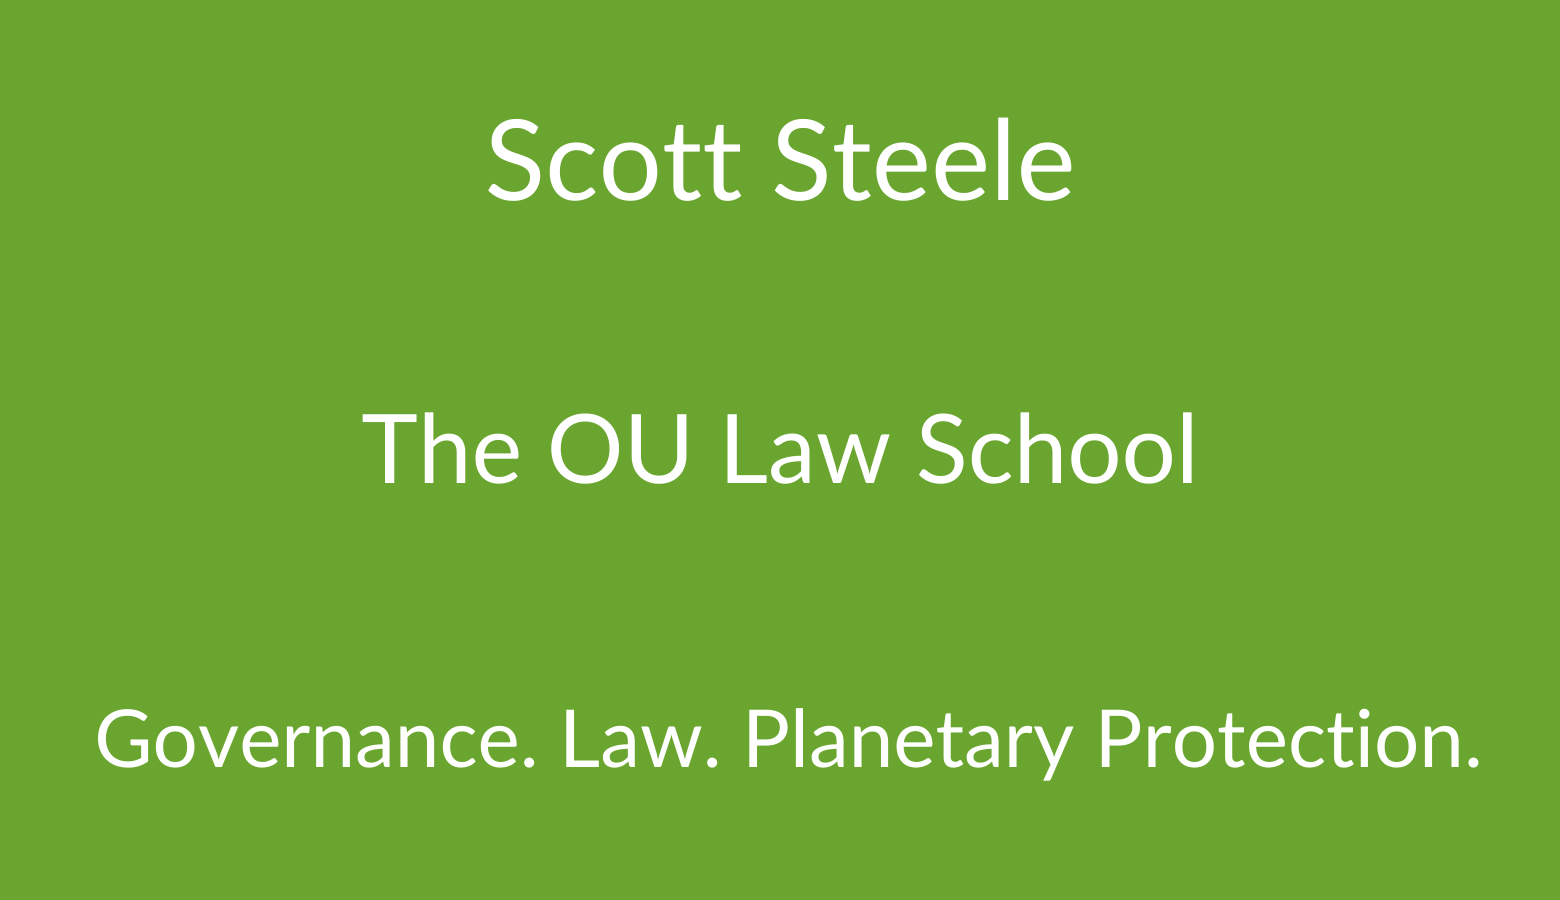 Scott Steele. The OU Law School. Governance. Law. Planetary Protection.